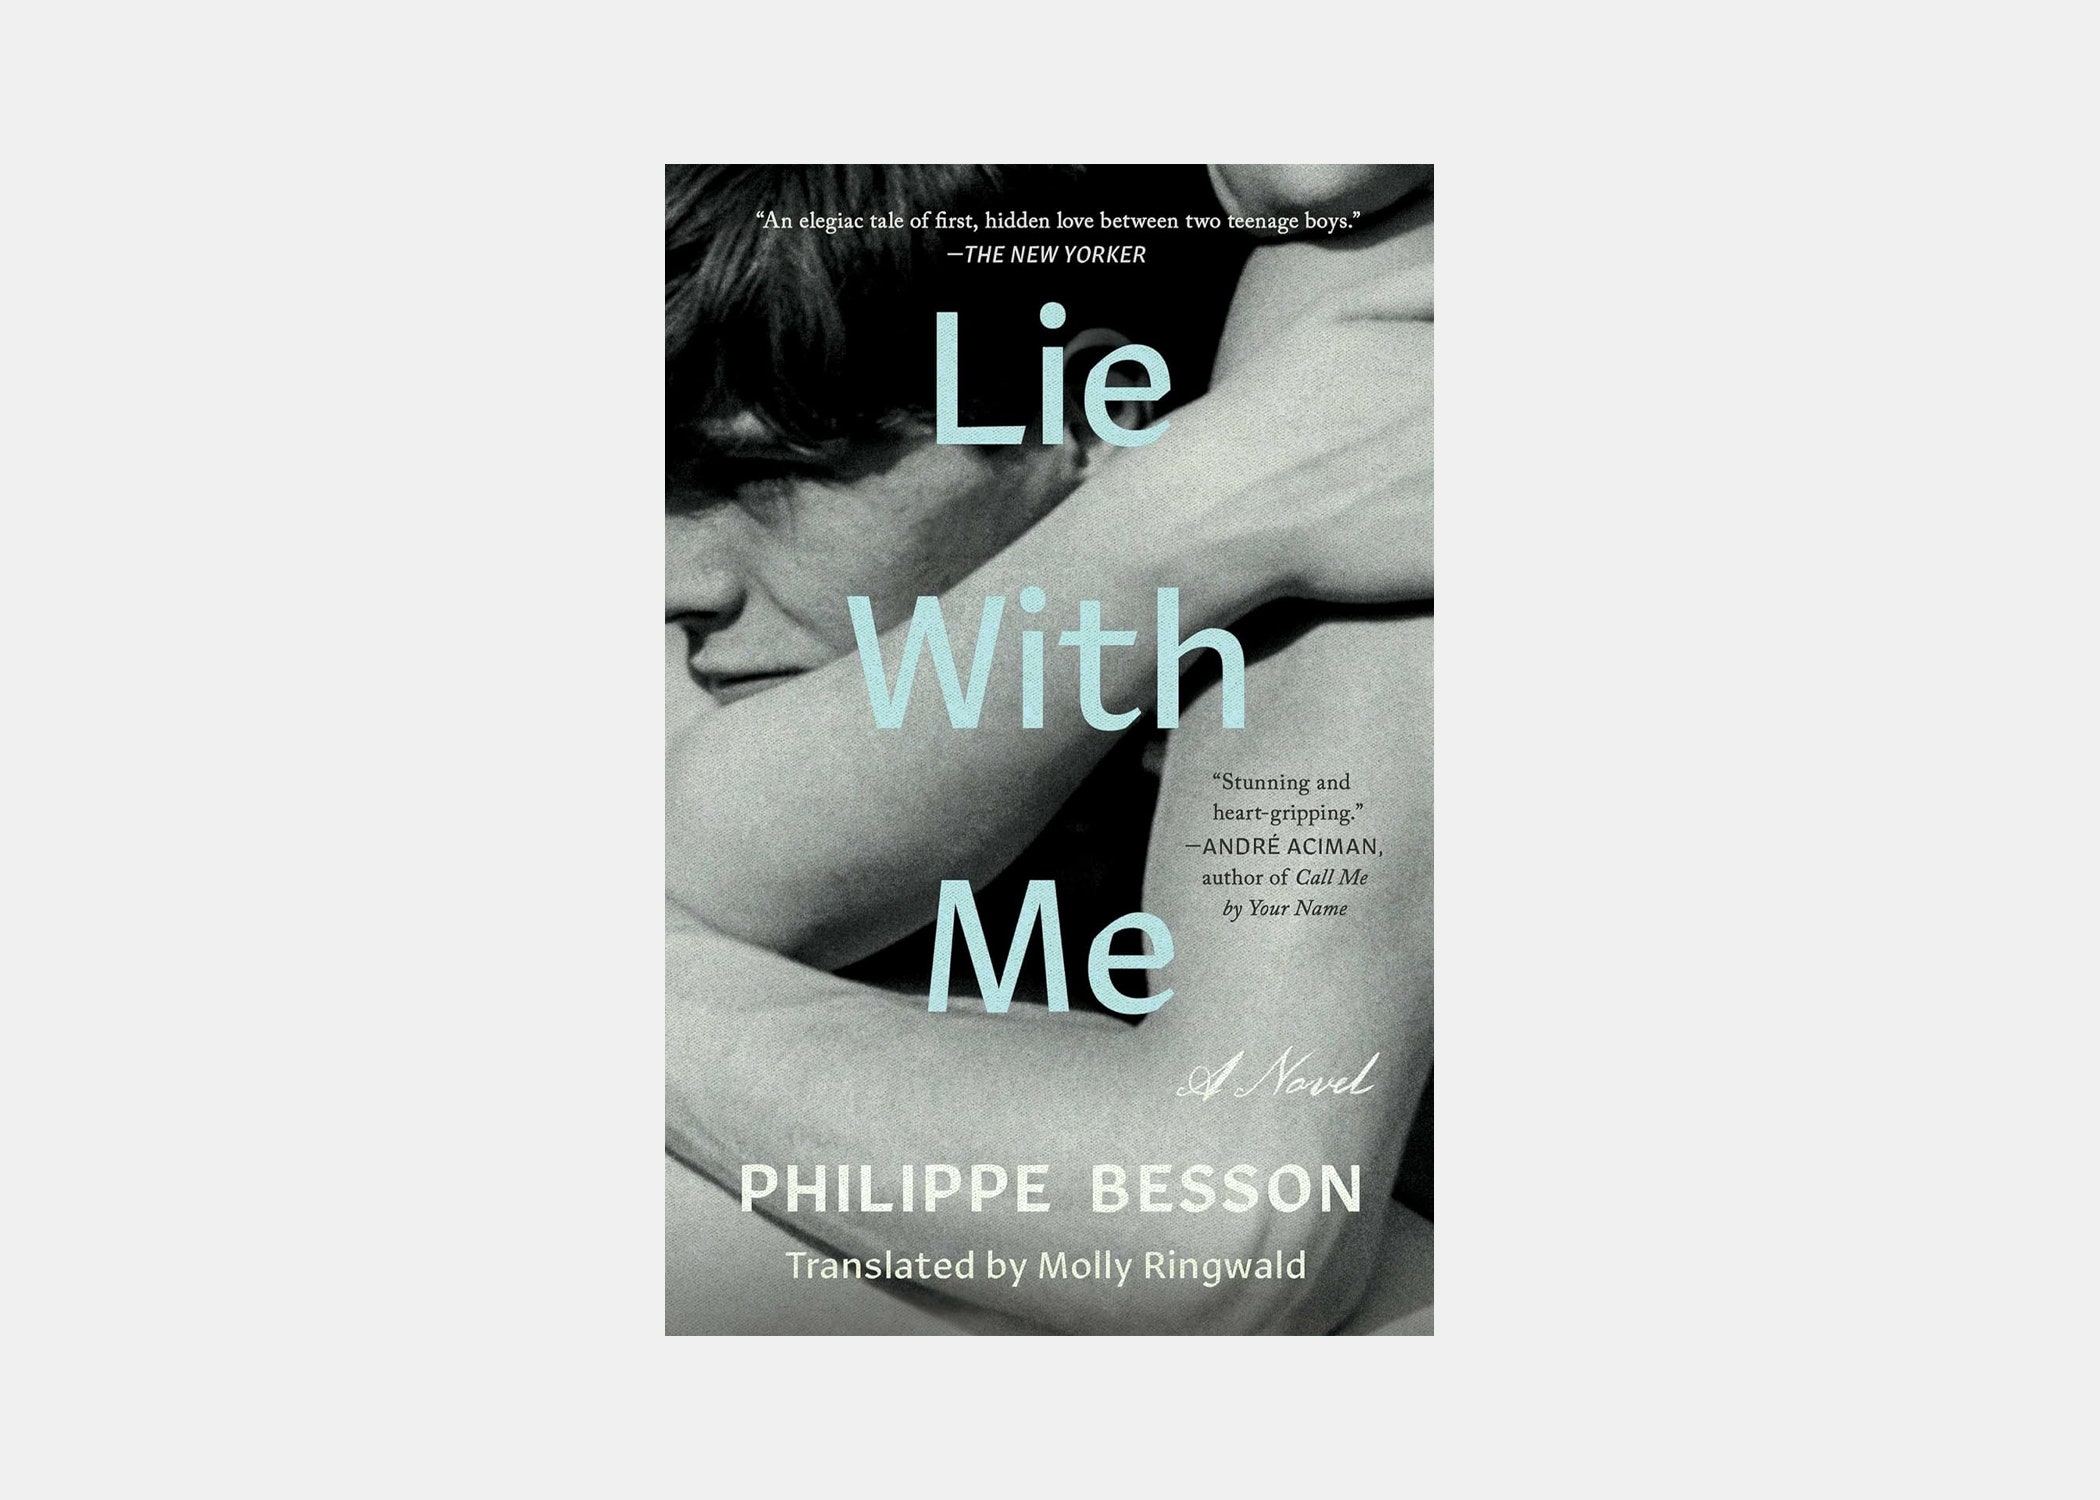 <p><strong>What it’s about:</strong> This short novel first published in 2017 as <em>Arrête avec tes mensonges</em> (literally, “stop with your lies”) was published as <em>Lie With Me</em> in the United States in 2017, where it was called “<a href="https://www.vulture.com/2019/05/lie-with-me-by-philippe-besson-metafiction-about-teen-love.html">this year’s <em>Call Me By Your Name</em></a><em>.</em>” The comparison is to be expected: Both books feature a romance between two young men in rural Western European settings in a bygone pre-AIDS era, narrated by a cerebral adult narrator trafficking in deep nostalgia and contemplating the impact of first love. Though the premise is familiar, Philippe Besson’s language is graceful (made a joy to read in English by the talented Molly Ringwald—yes, that Molly Ringwald) and his narration is inventive. In the text, his metafictional moves involve and implicate the reader, while challenging the ways storytellers remember past events and past lives. As a reading experience, it all feels unique and—I’m not sure how else to say it—supremely French.</p> <p><strong>You should read this when:</strong> You’re on a TGV, as the French countryside speeds past outside your window, contemplating if you want to let your life similarly pass you by.</p> <p><strong>The book’s opening lines:</strong> “One day—I can say precisely when, I know the date—I find myself in the bar of a hotel lobby in a provincial city, sitting in an armchair across from a journalist, a low round table between us, being interviewed for my latest novel, which recently came out.”</p> $12, Amazon. <a href="https://www.amazon.com/Lie-Me-Novel-Philippe-Besson/dp/1501197886/ref=sr_1_1">Get it now!</a><p>Sign up to receive the latest news, expert tips, and inspiration on all things travel</p><a href="https://www.cntraveler.com/newsletter/the-daily?sourceCode=msnsend">Inspire Me</a>